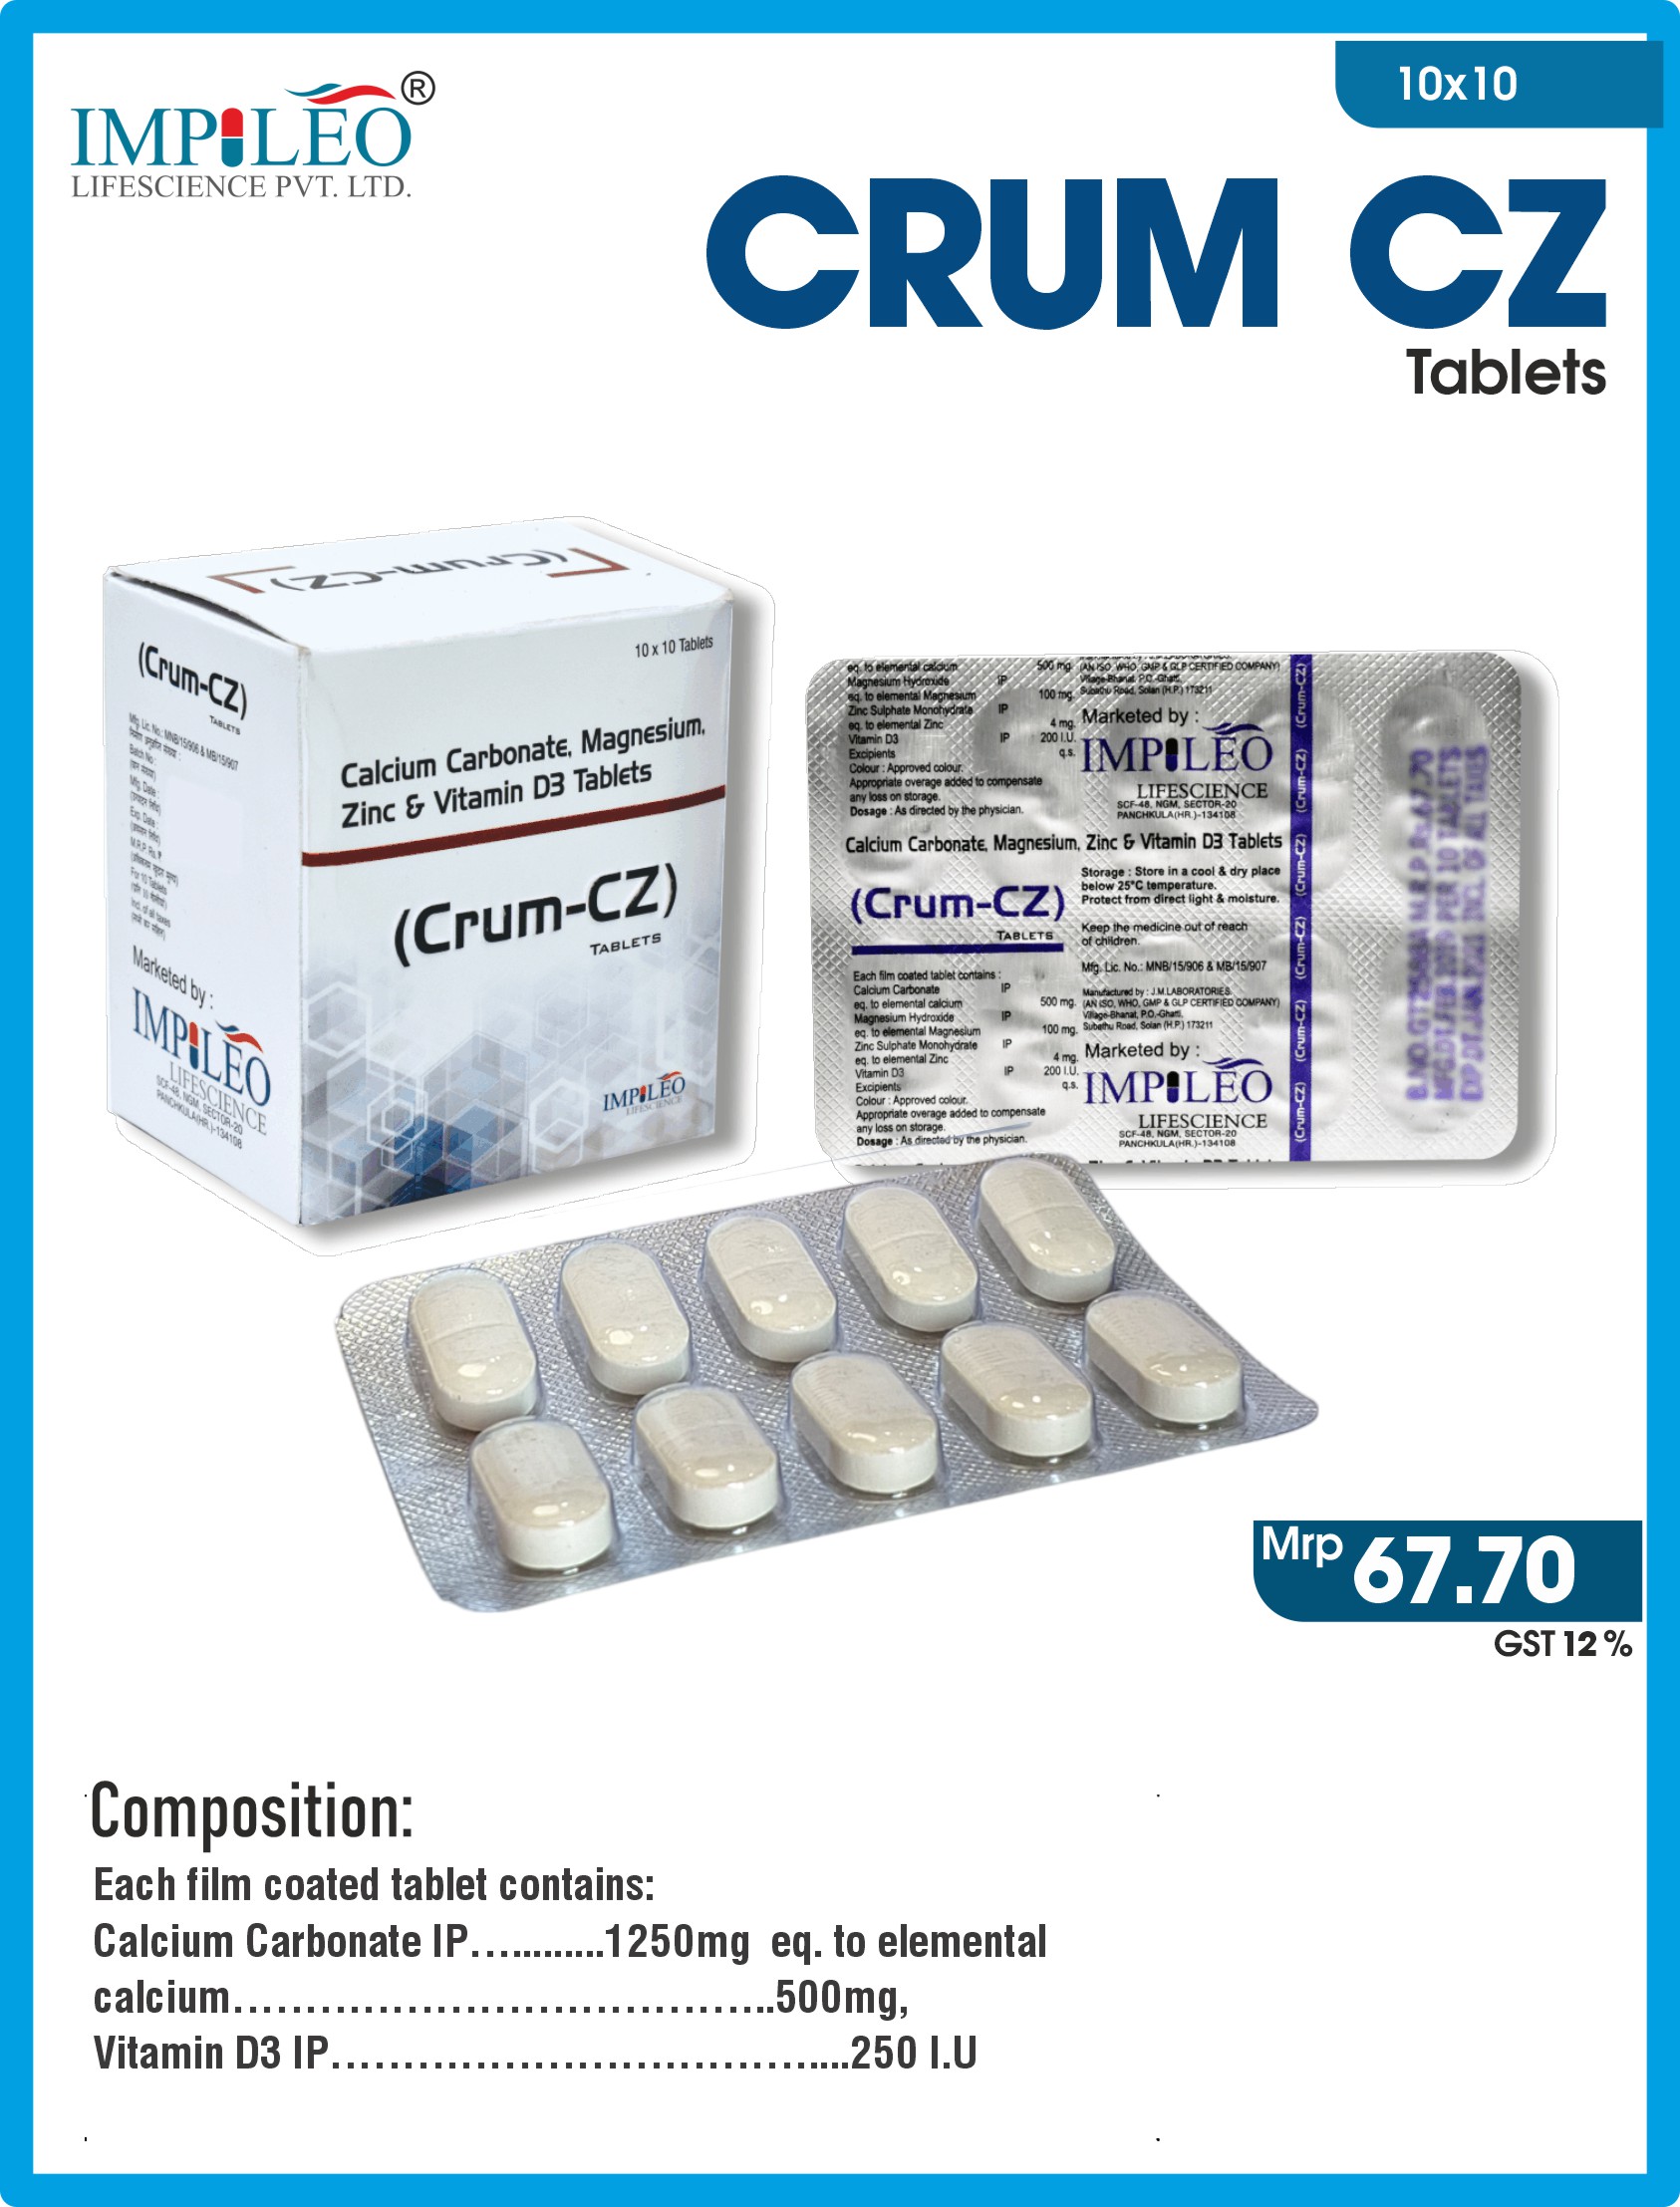 Top PCD Pharma Franchise in Chandigarh Ensures Quality CRUM CZ Tablets